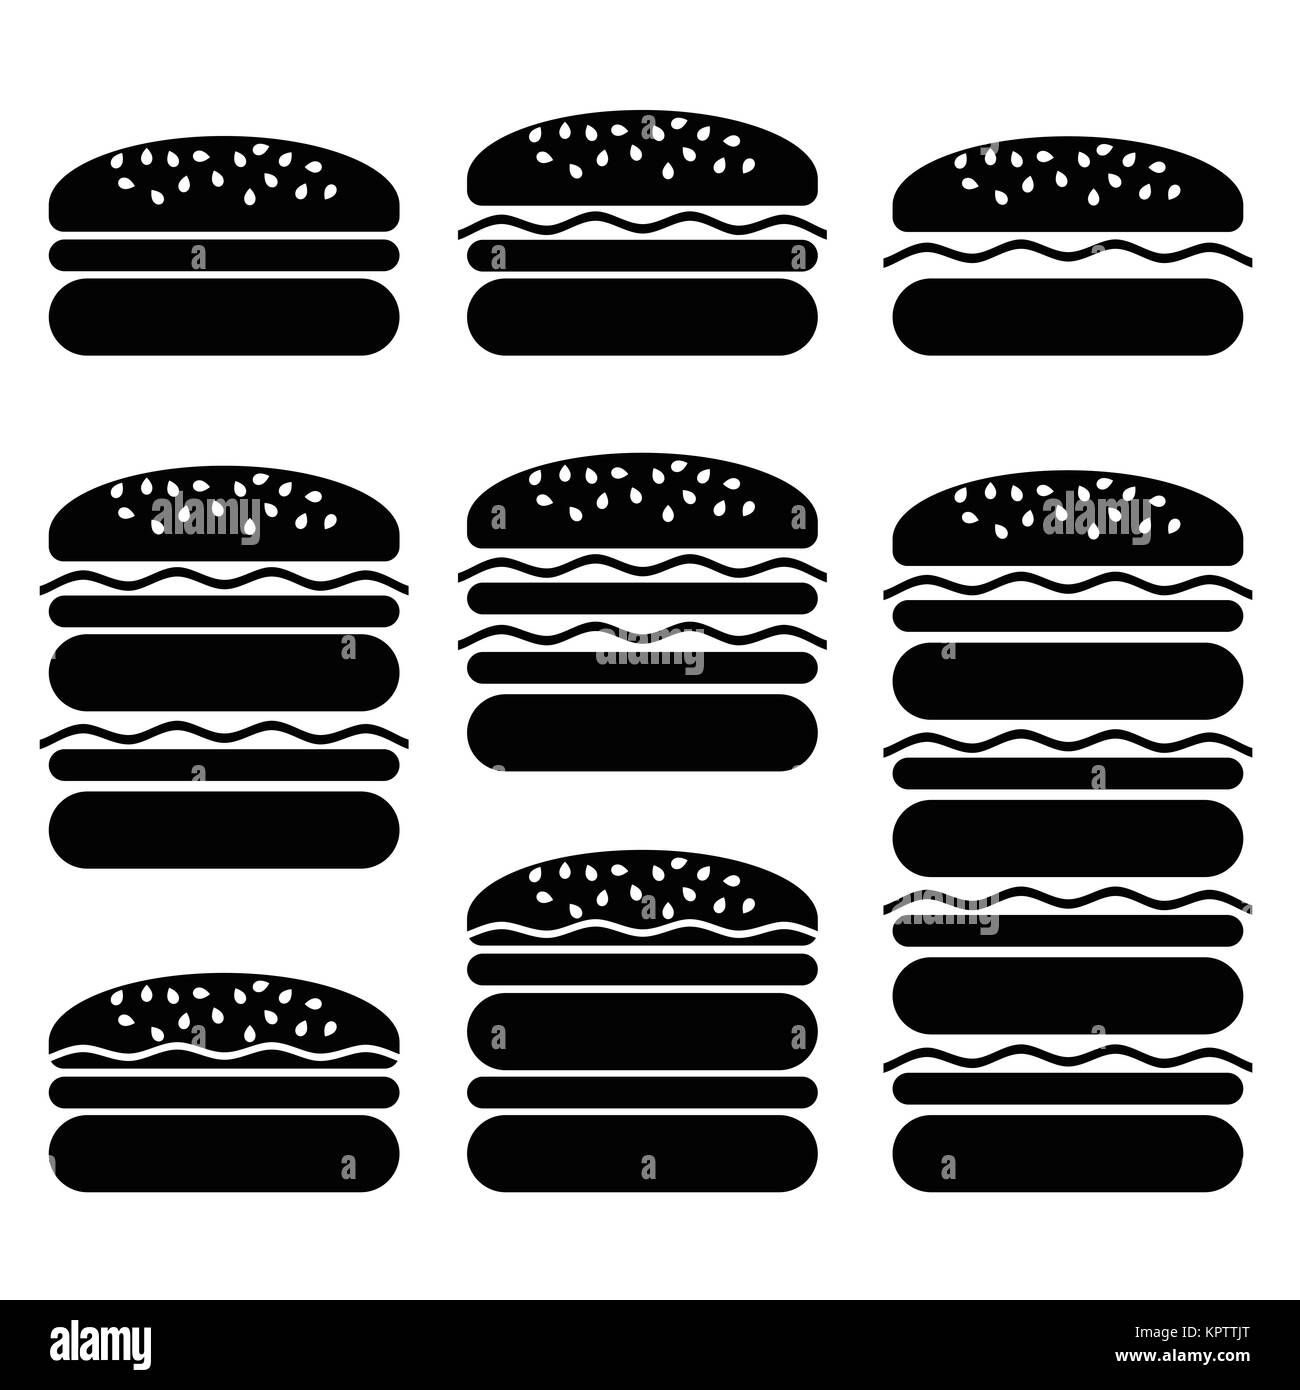 Set of Different Hamburger Icons Isolated on White Background. Symbol of Fast Food. Stock Photo